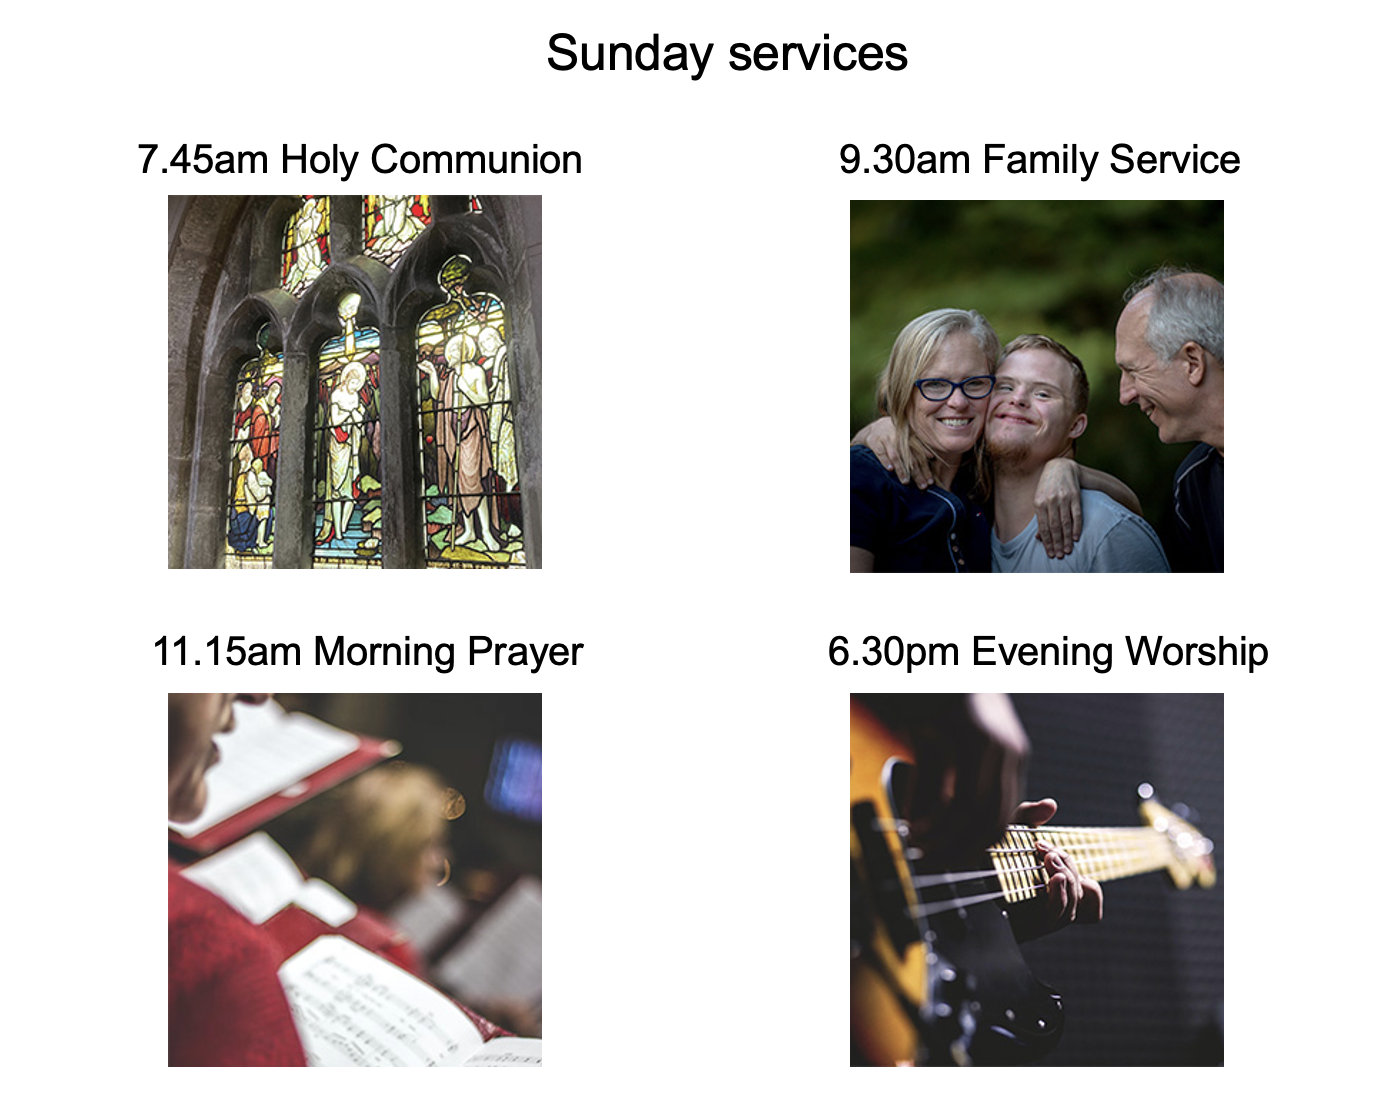 Sunday services smaller